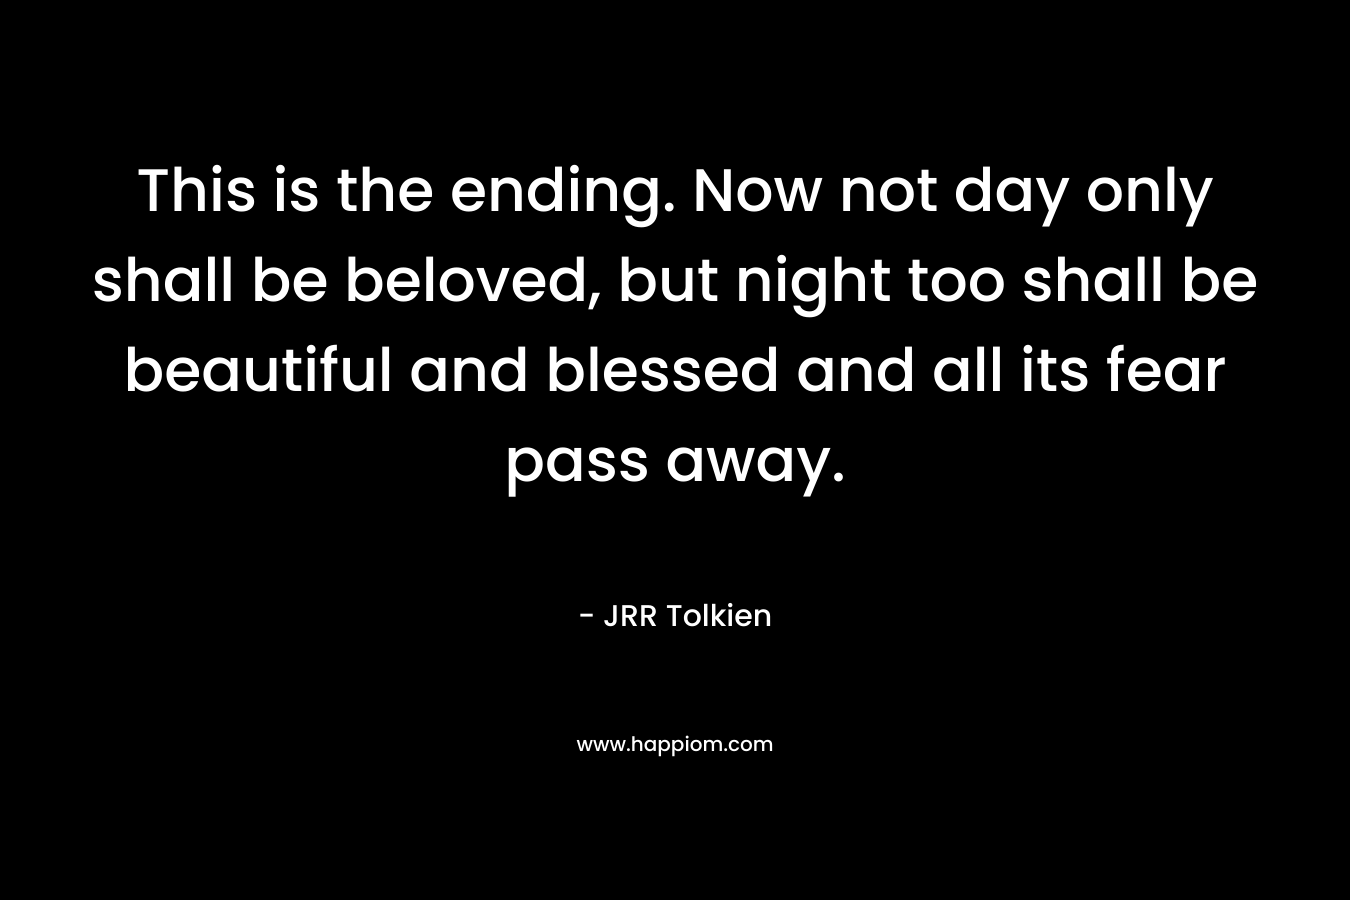 This is the ending. Now not day only shall be beloved, but night too shall be beautiful and blessed and all its fear pass away.